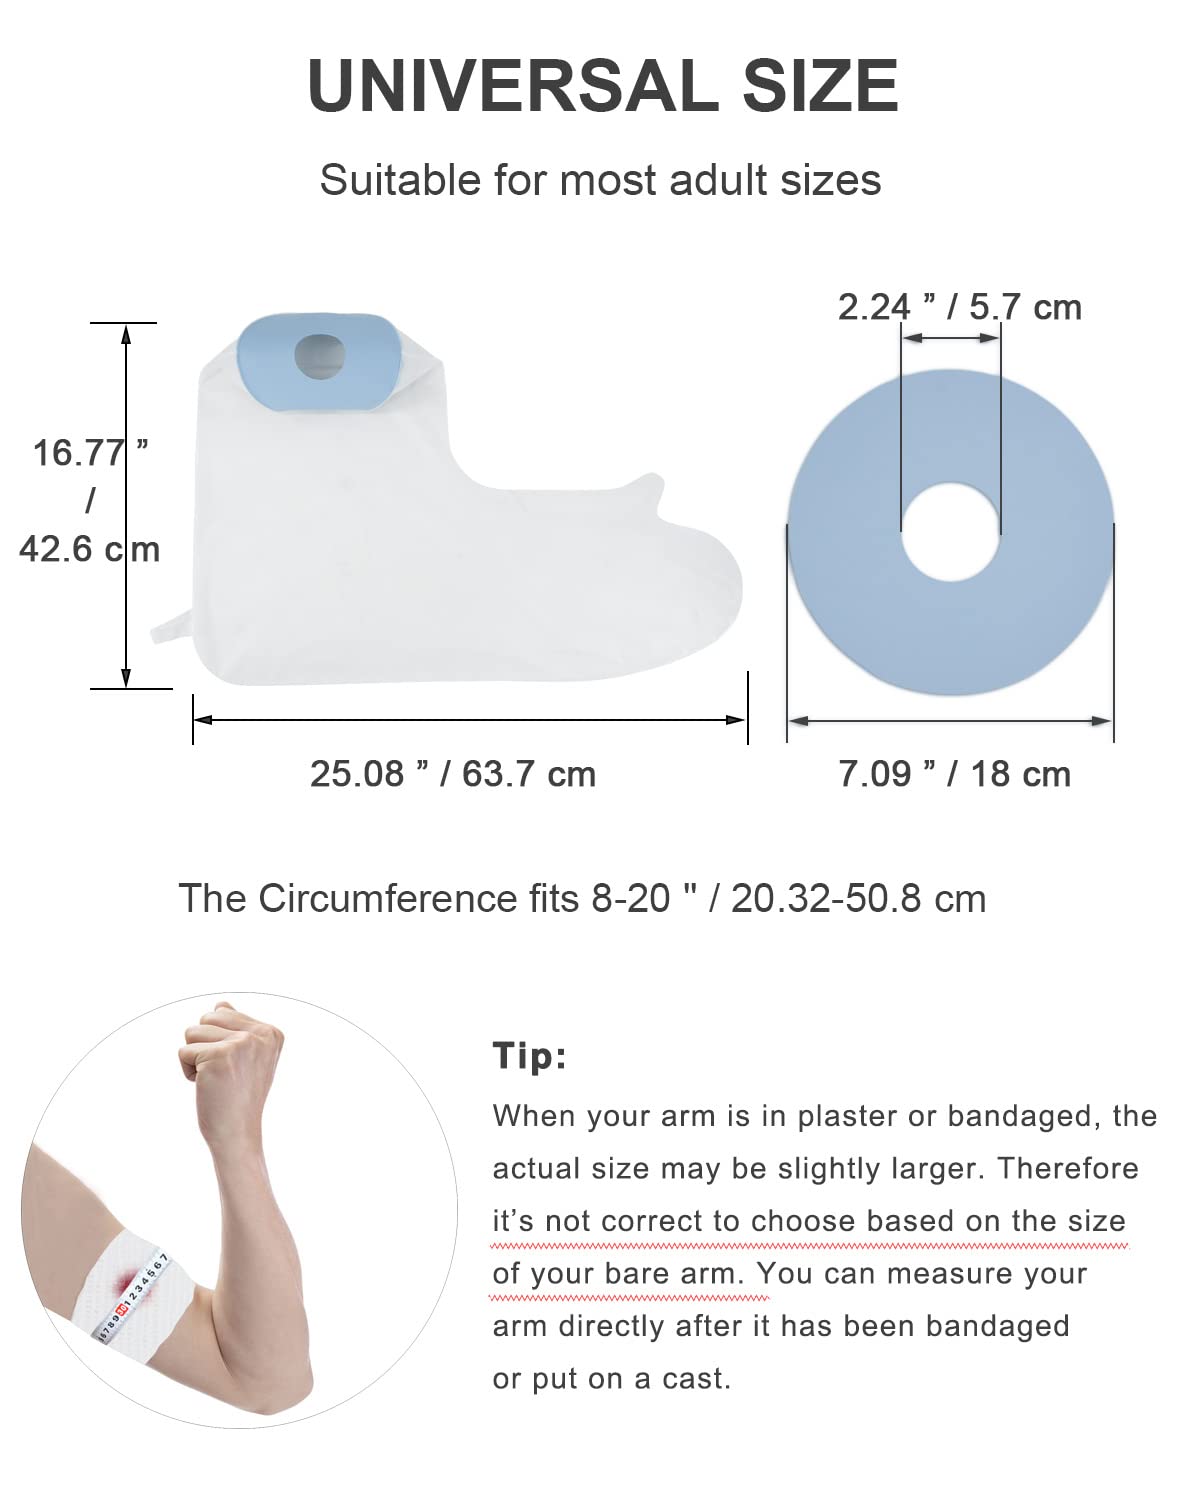 CureSquad Plaster Cast Waterproof Cover Arm, Waterproof Cast Cover Arm, Cast Cover for Shower Arm Cast Waterproof Cover, Soft Comfortable Arm Cast Cover for Swimming, Reusable Cast Protectors